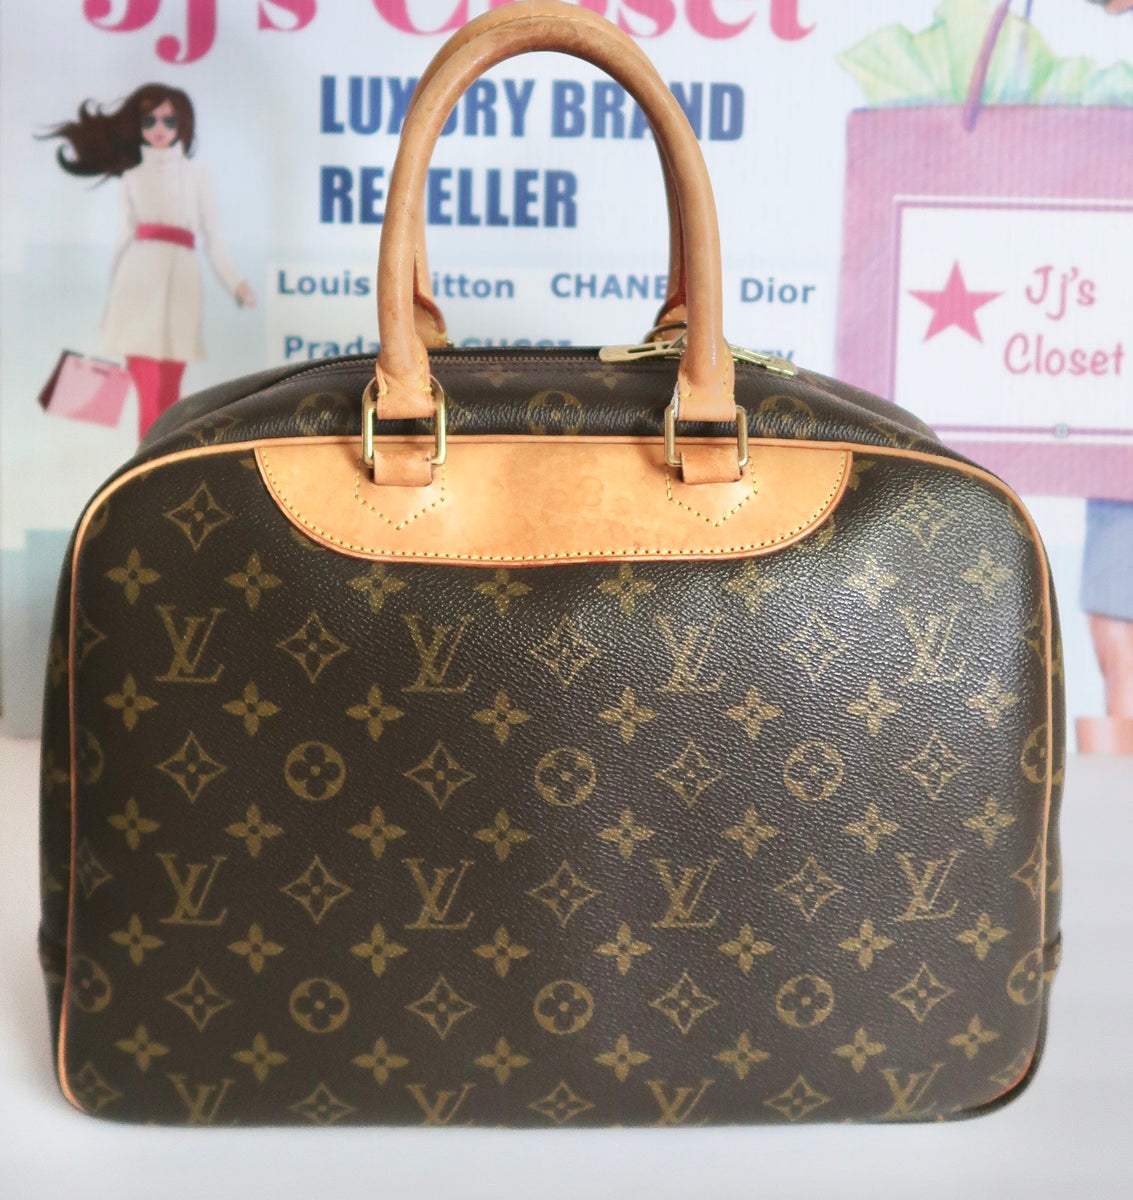 SOLD) genuine pre-owned Louis Vuitton deauville bag – Deluxe Life